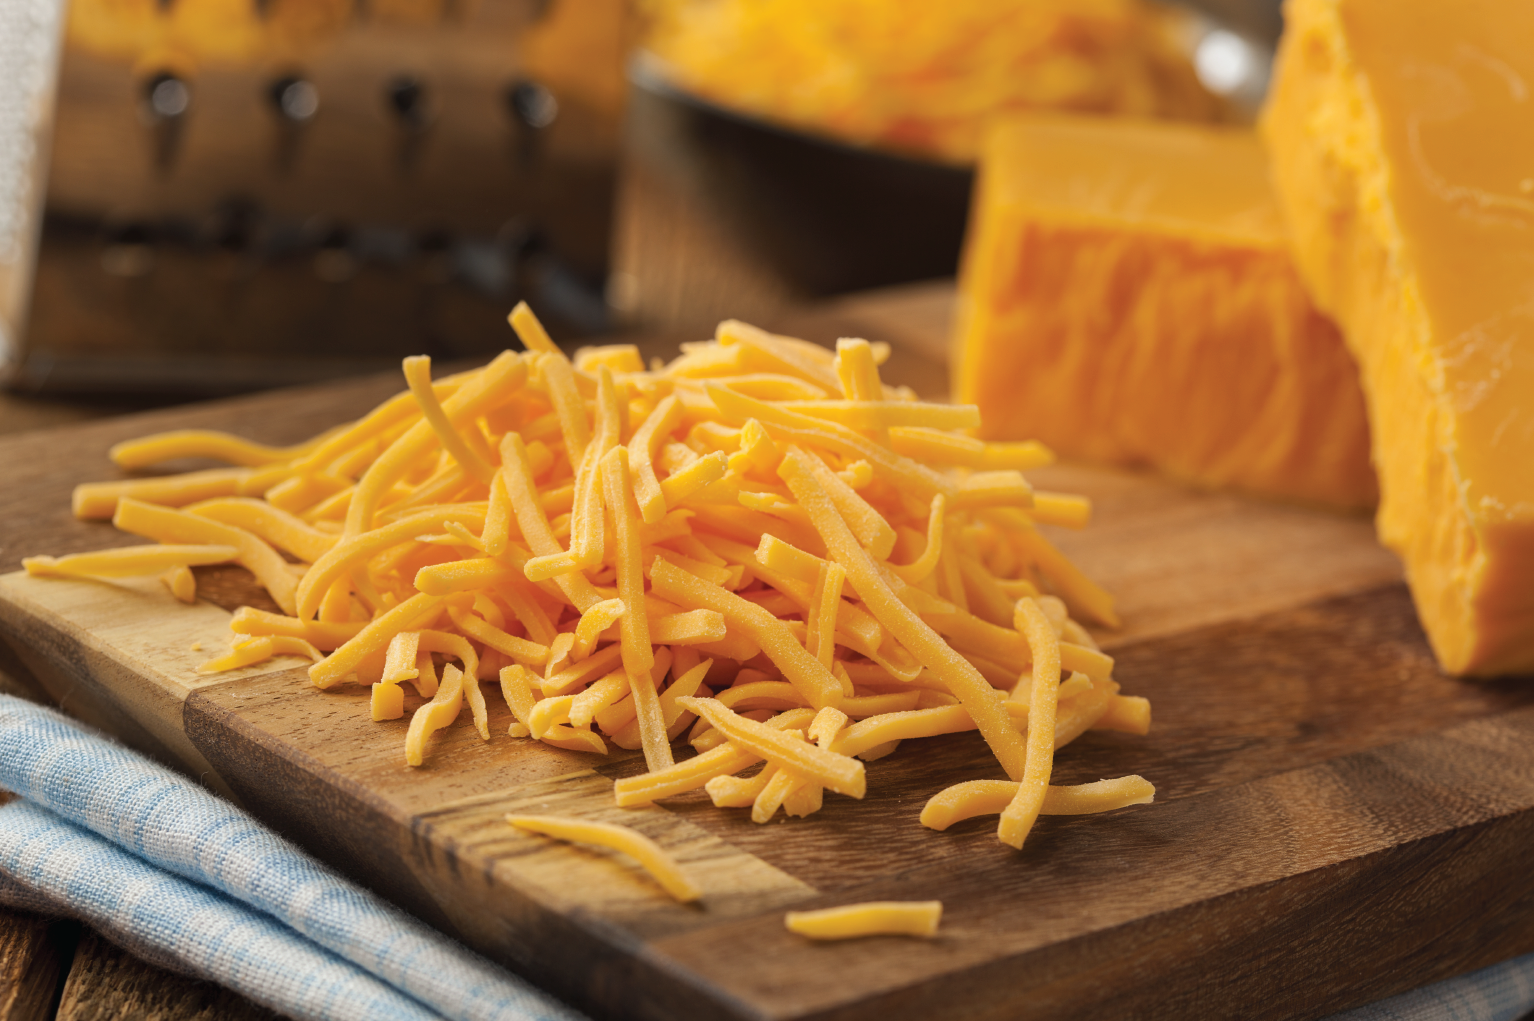 Explore dairy and cheese trends for operators and suppliers in 2020.